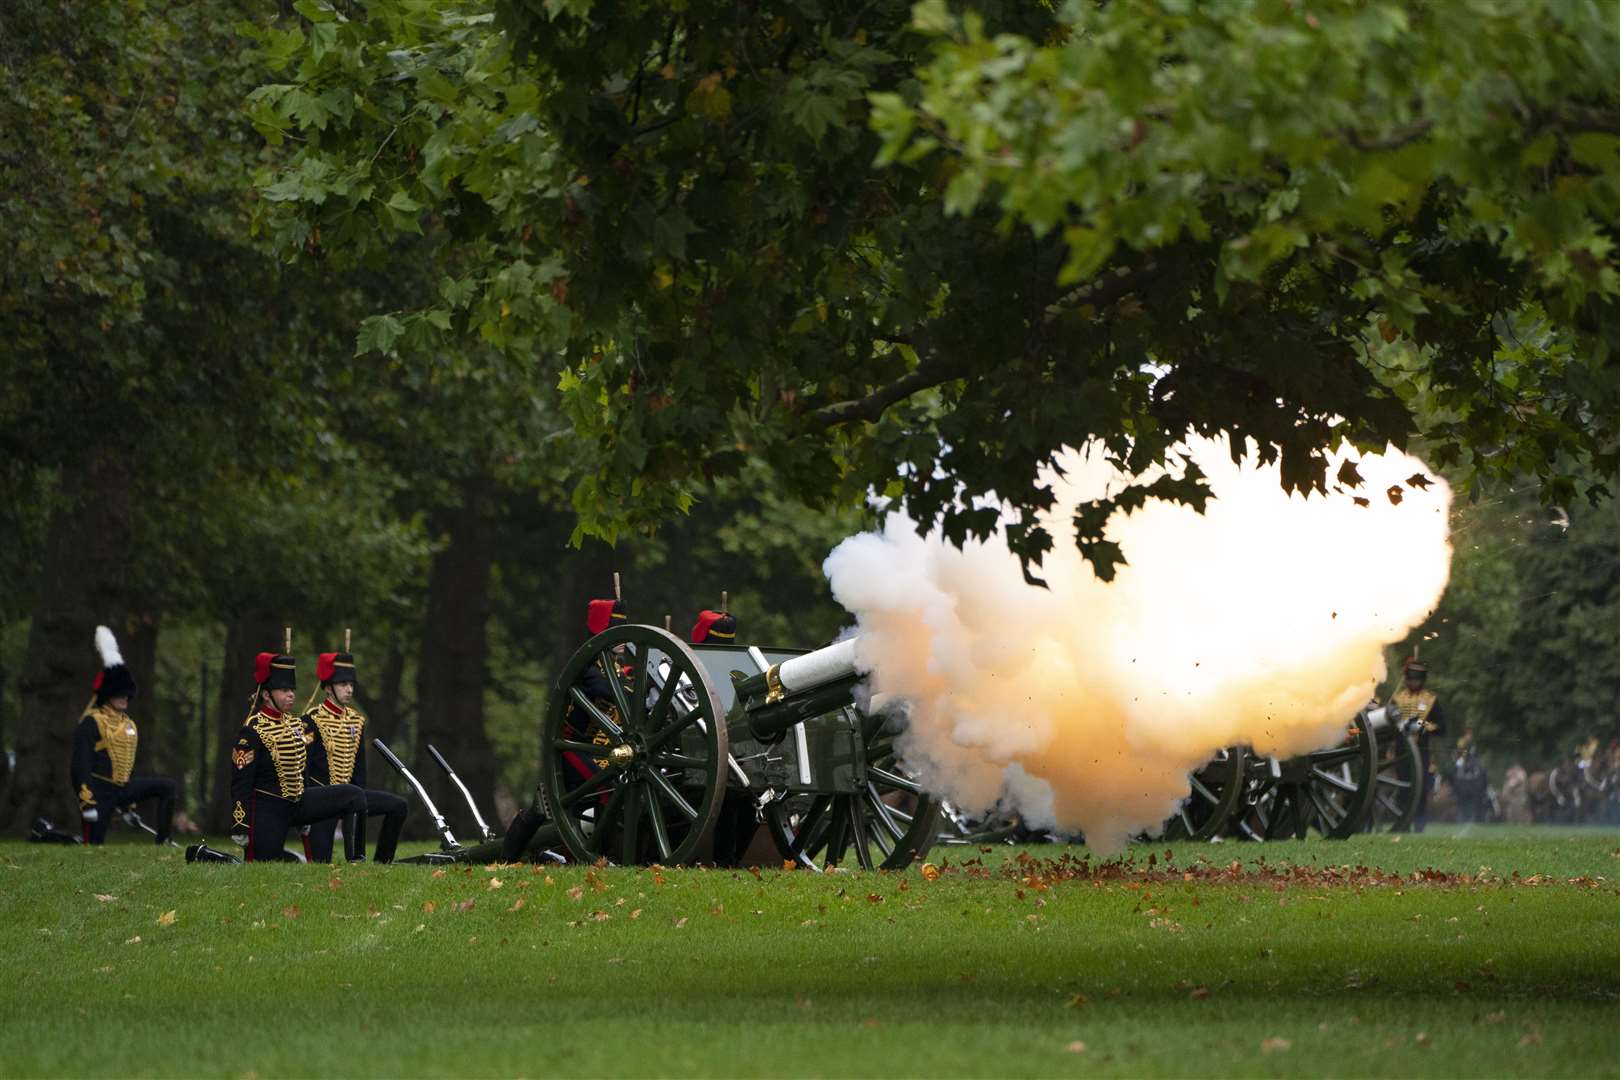 Members of The King’s Troop Royal Horse Artillery during the Gun Salute at London’s Hyde Park (Kirsty O’Connor”/PA)